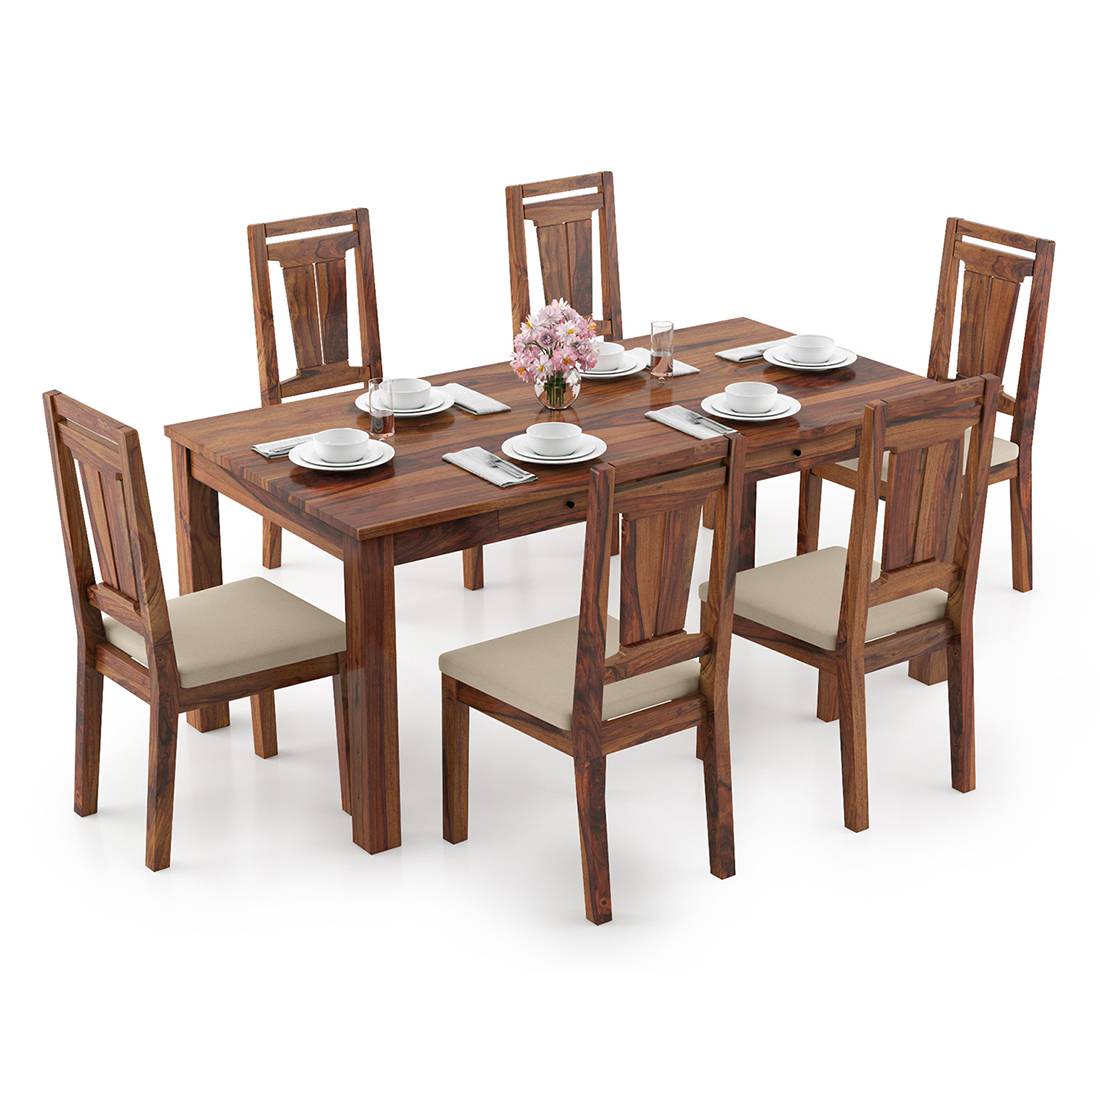 6 Seater Dining Table Sets Six, 6 Seater Dining Table Size With Chairs